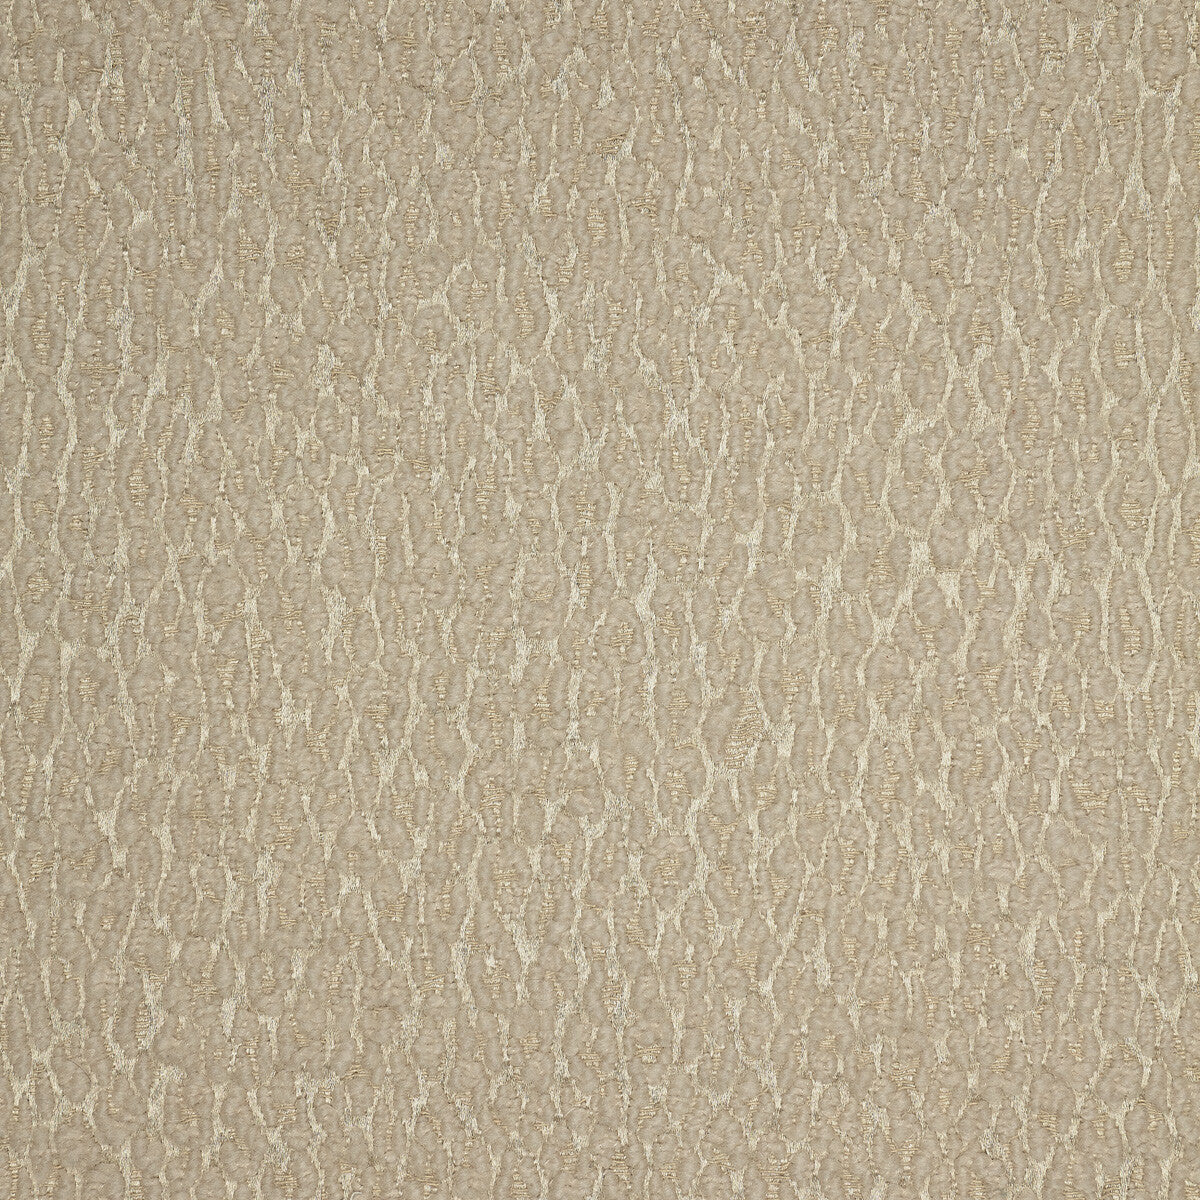 Magma fabric in 6 color - pattern LZ-30394.06.0 - by Kravet Design in the Lizzo collection